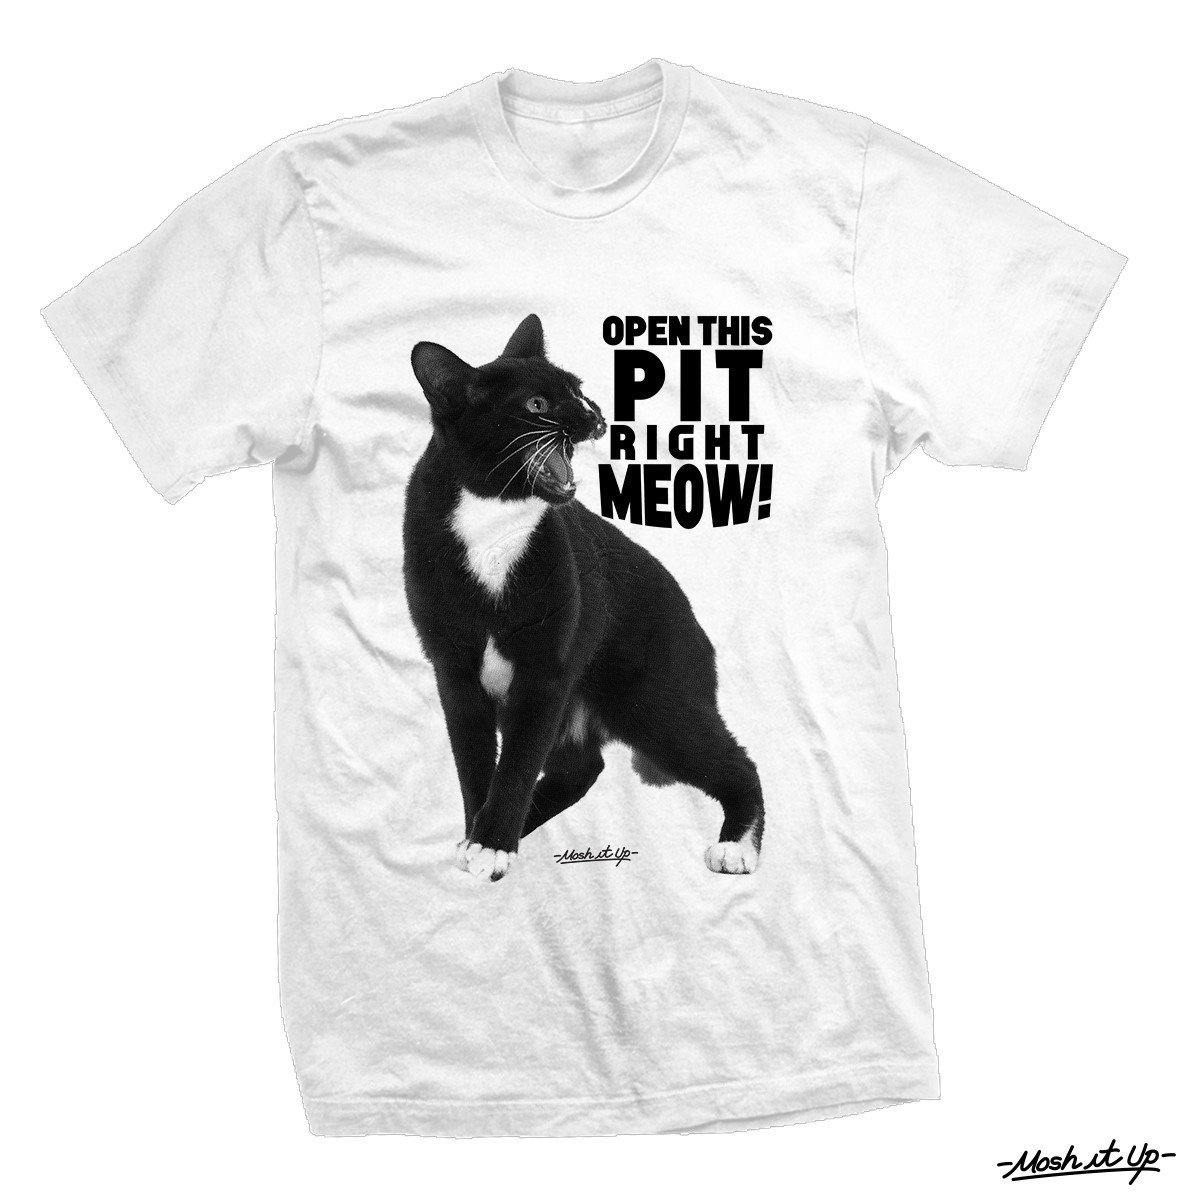 Buy – Mosh It Up "Open This Pit Right Meow" Shirt – Band & Music Merch – Cold Cuts Merch